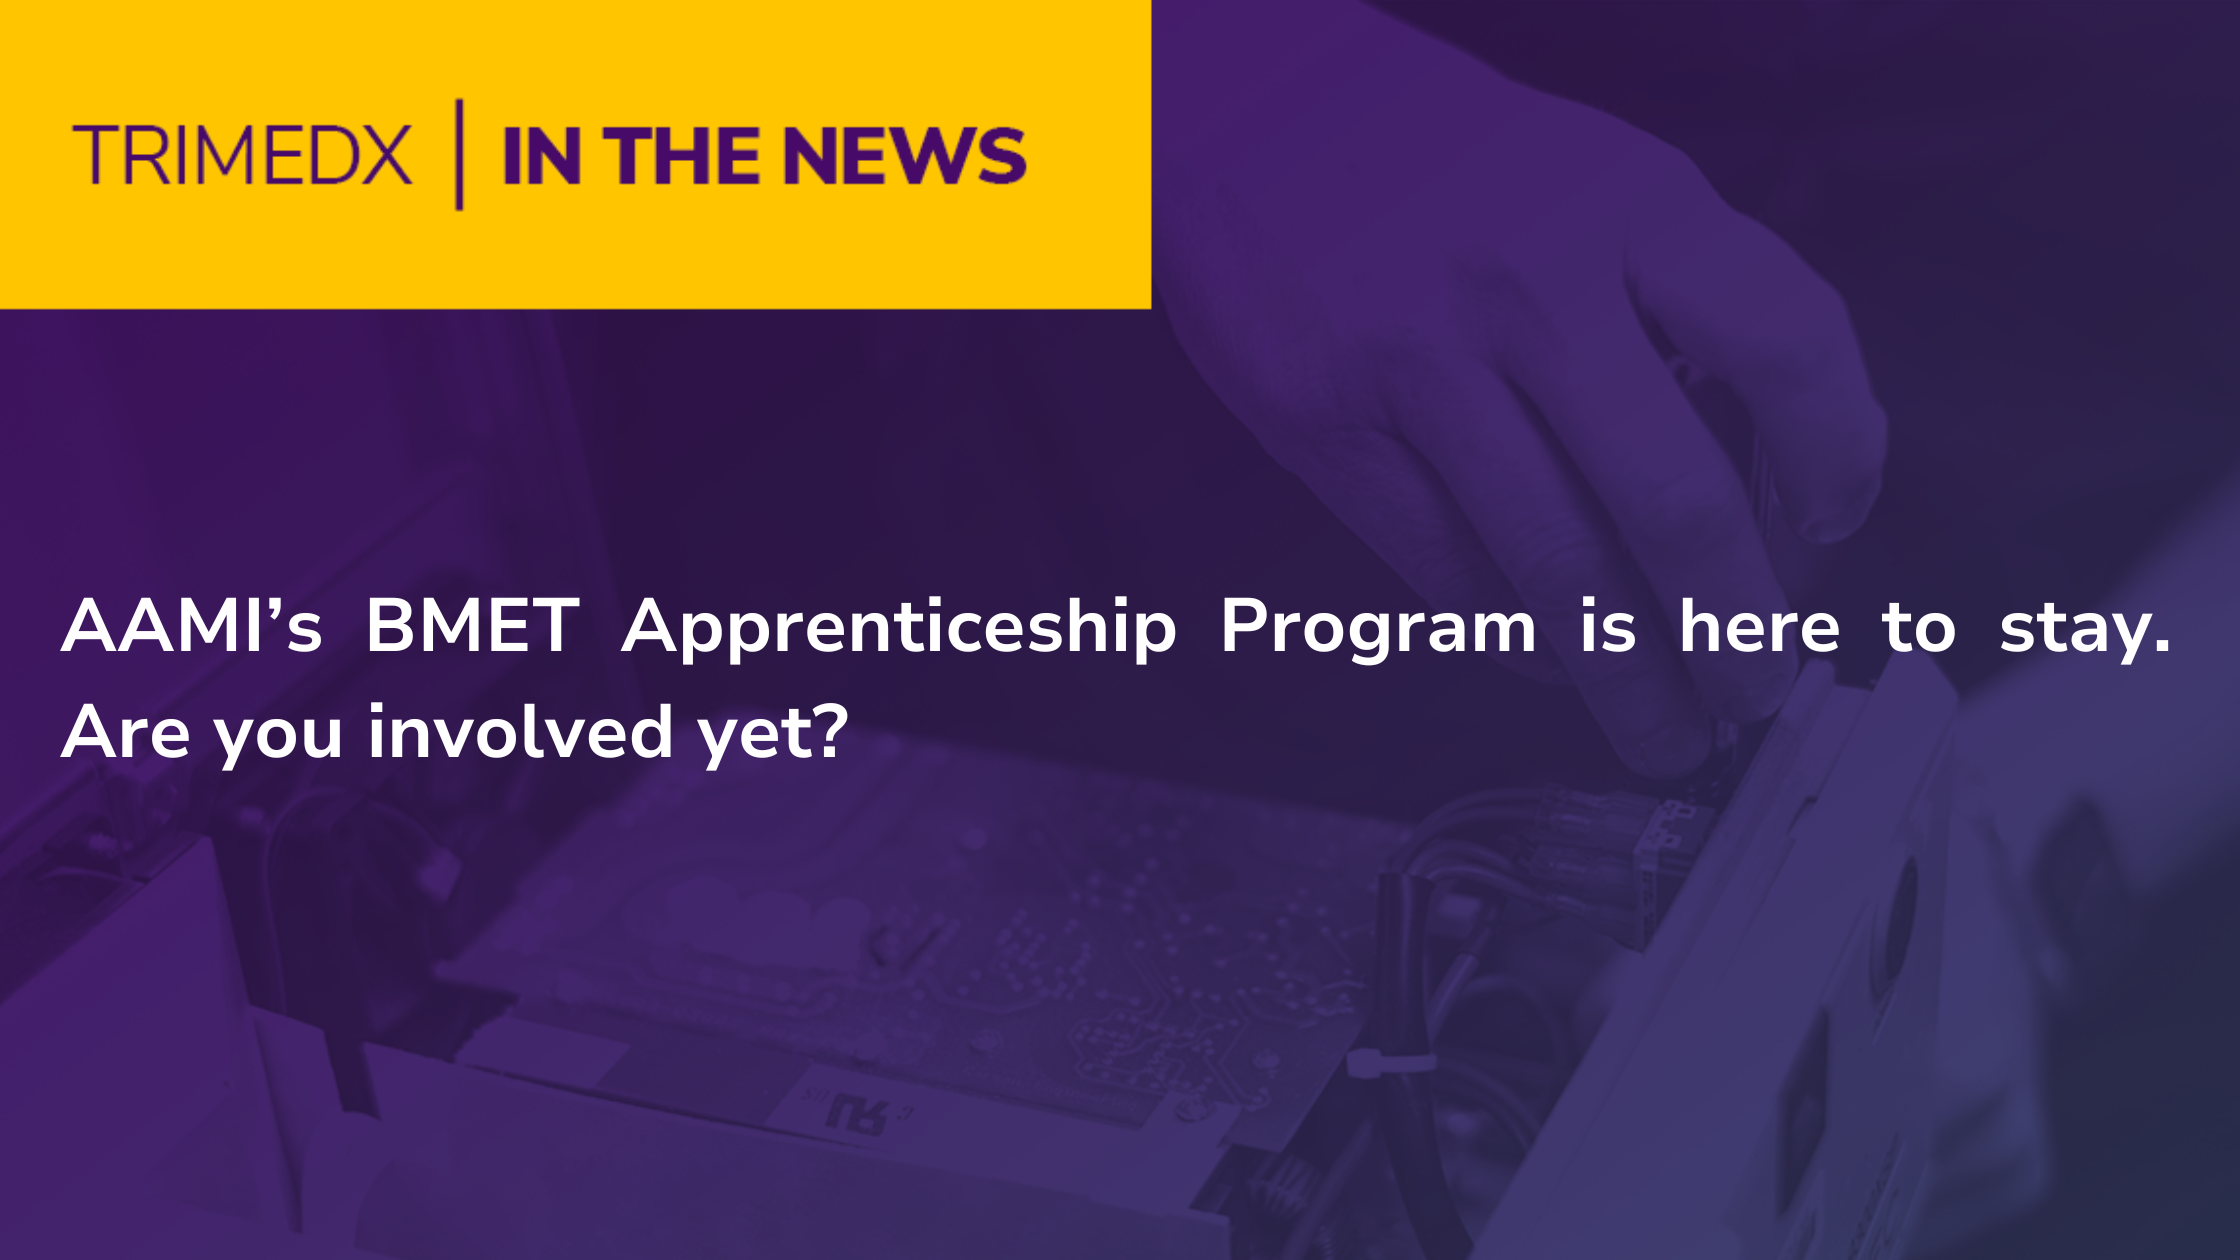 AAMI’s BMET Apprenticeship Program is here to stay. TRIMEDX in the news graphic